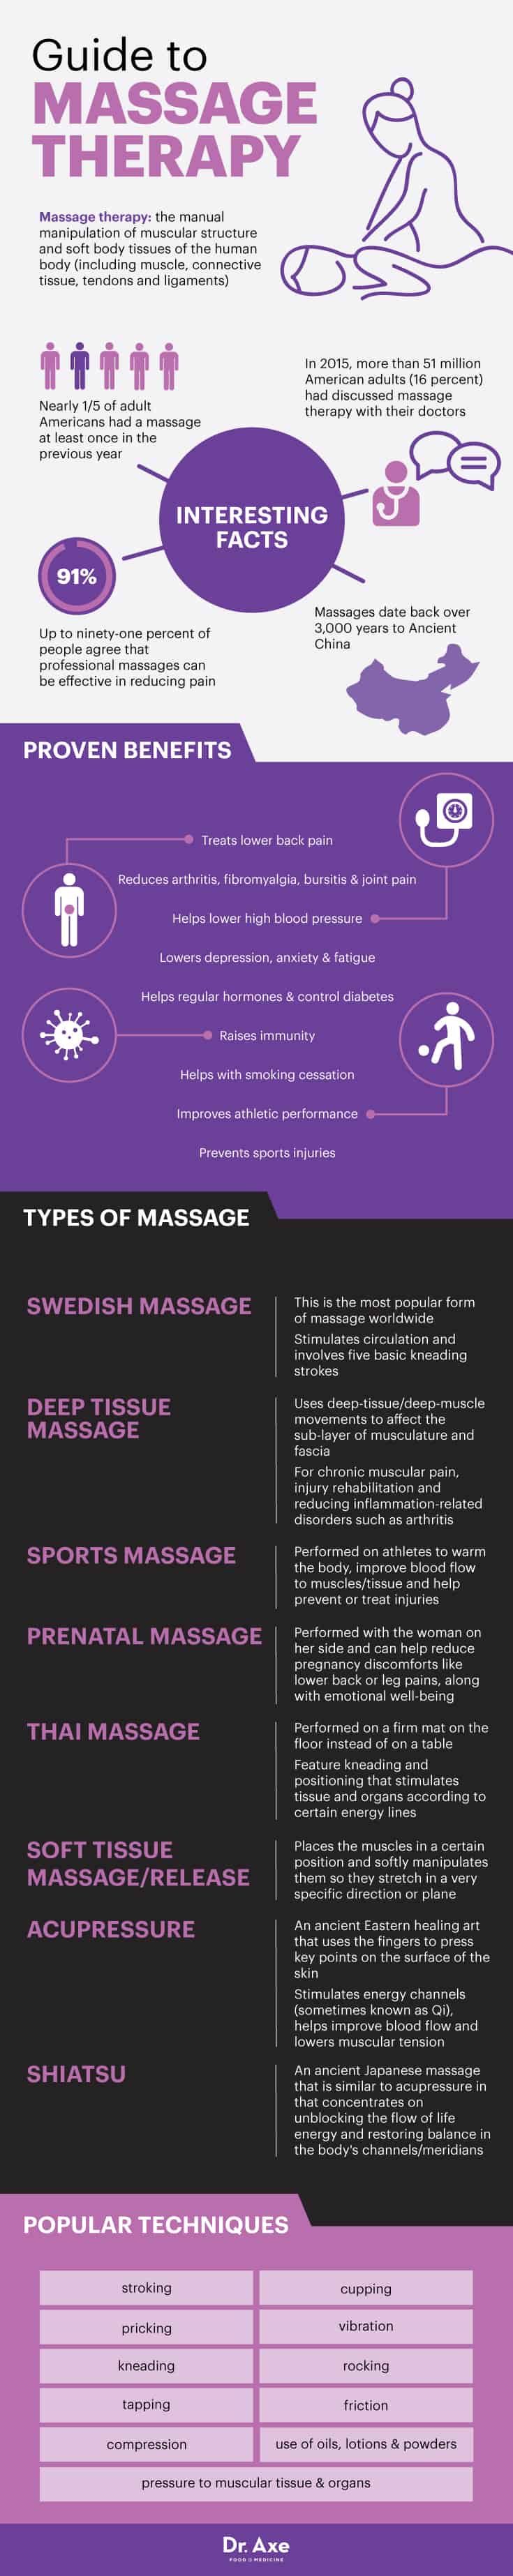 Guide to massage therapy - Dr, Axe